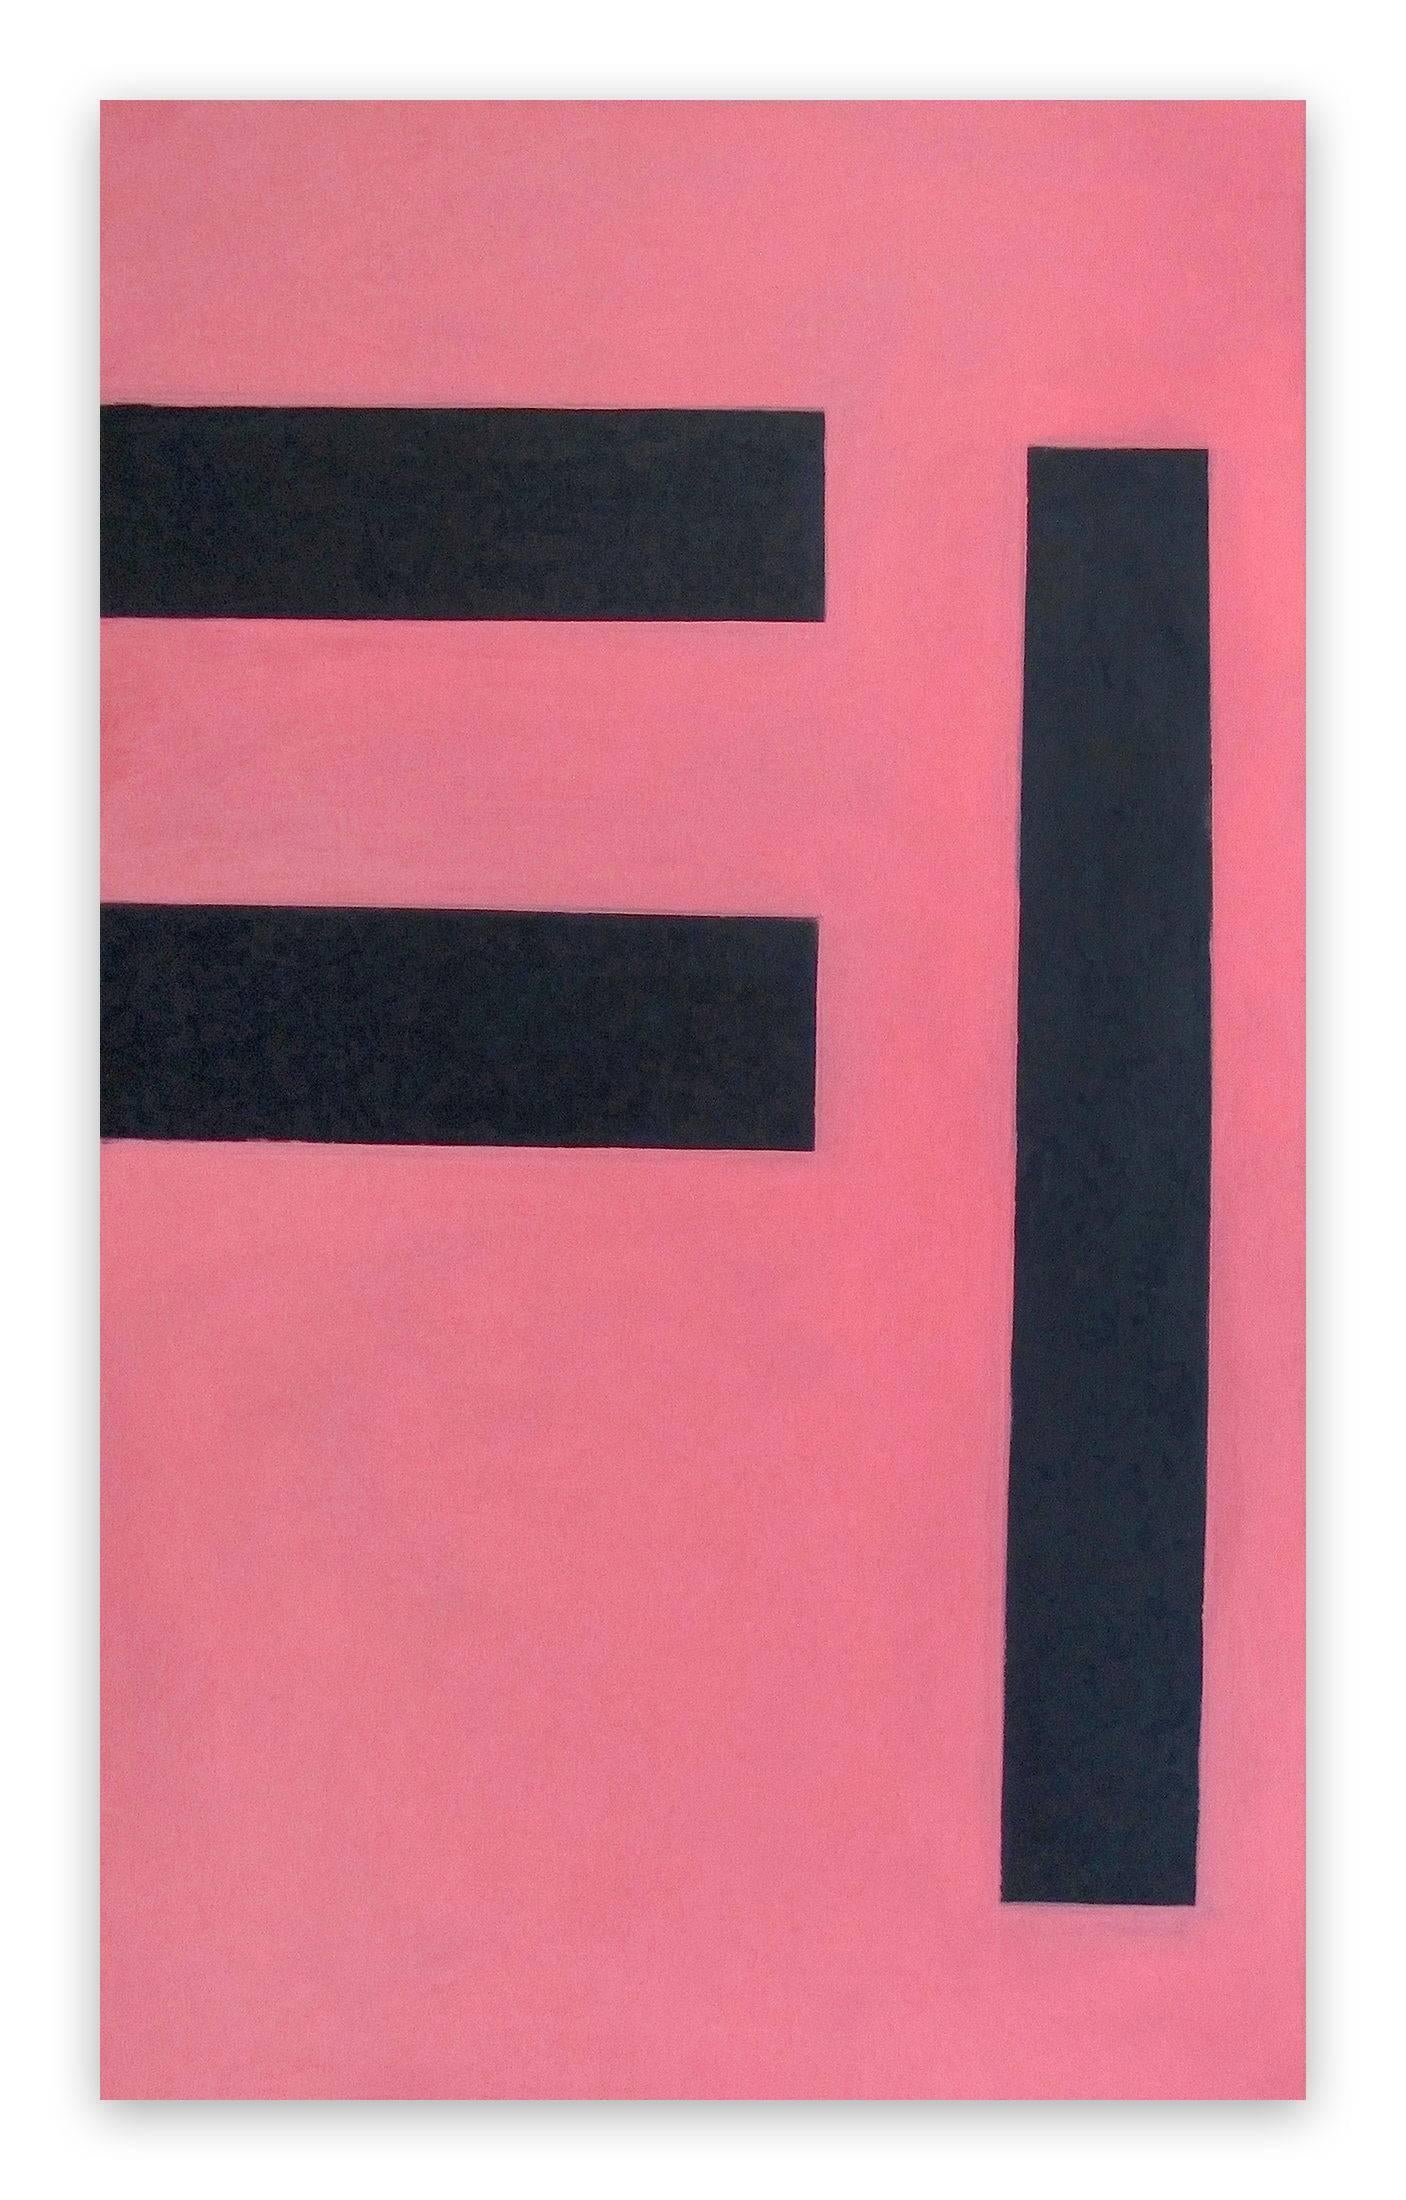 Untitled 2 (Pink) 1992